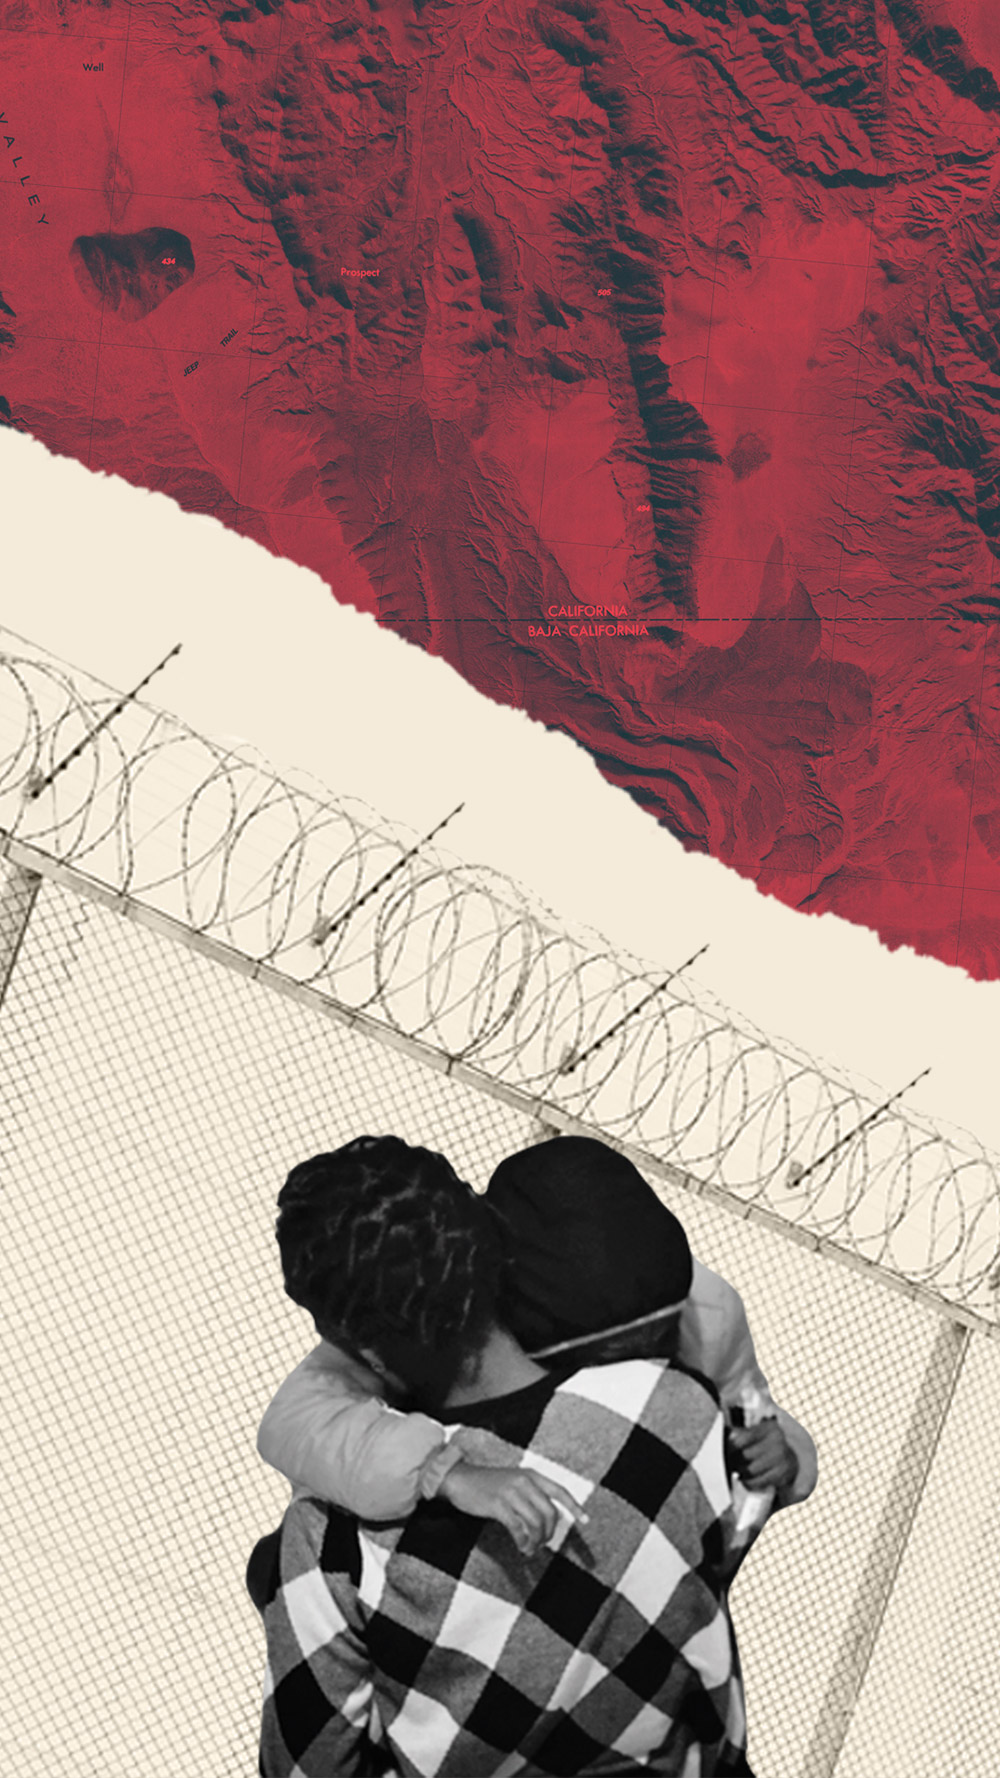 A collage of a black-and-white image of two people hugging, overlaying a beige and red background with a barbed wire gate behind the people. This image depicts the difficulties of family separation policies that have come from the Trump administration.